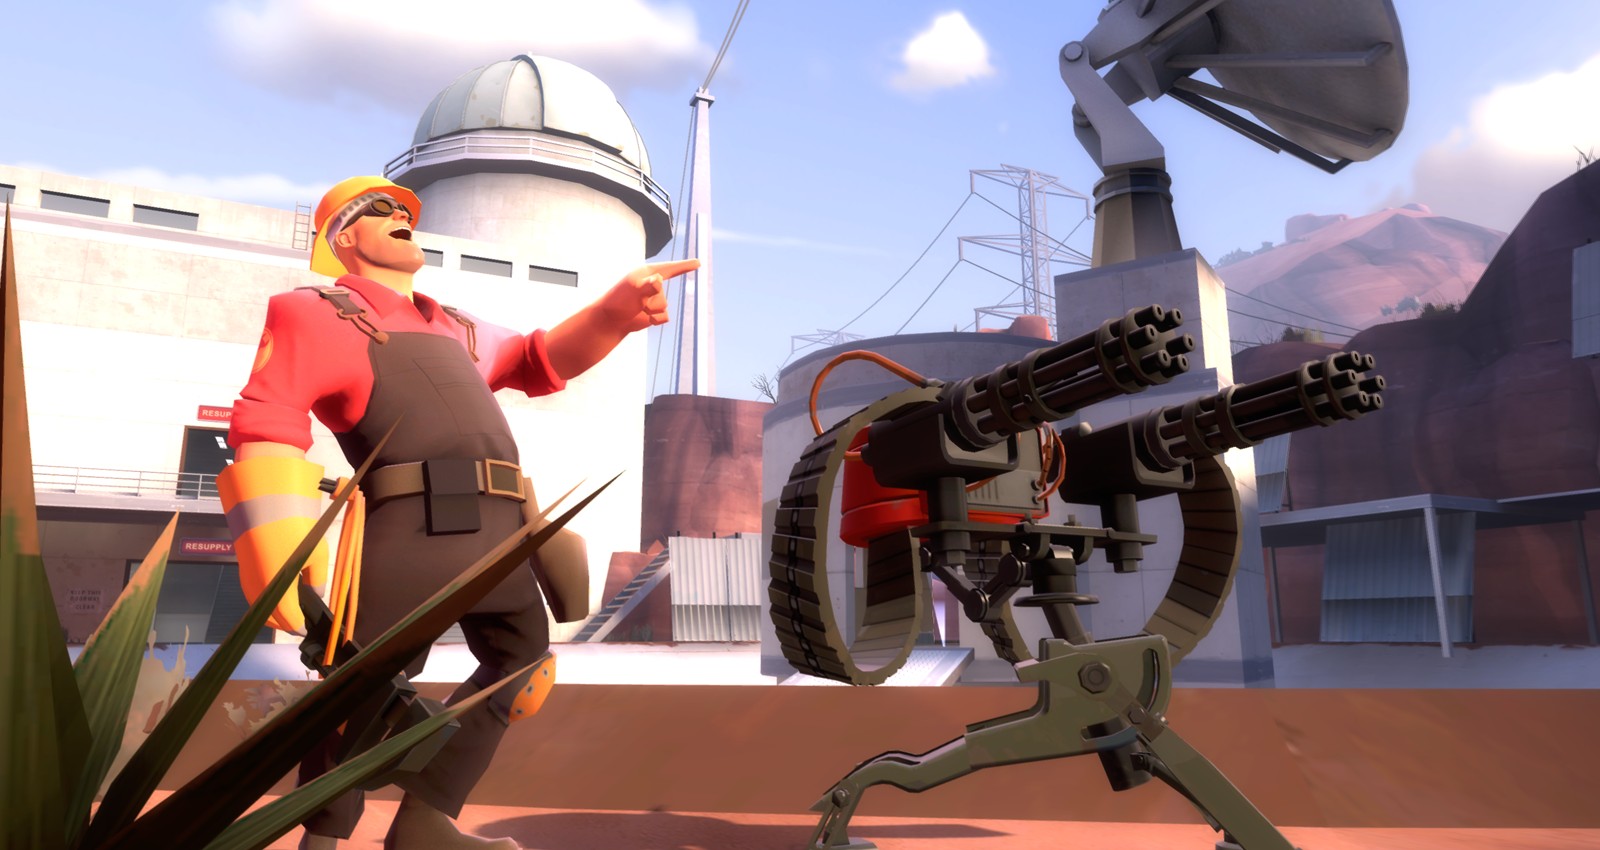 Team Fortress 2 system requirements